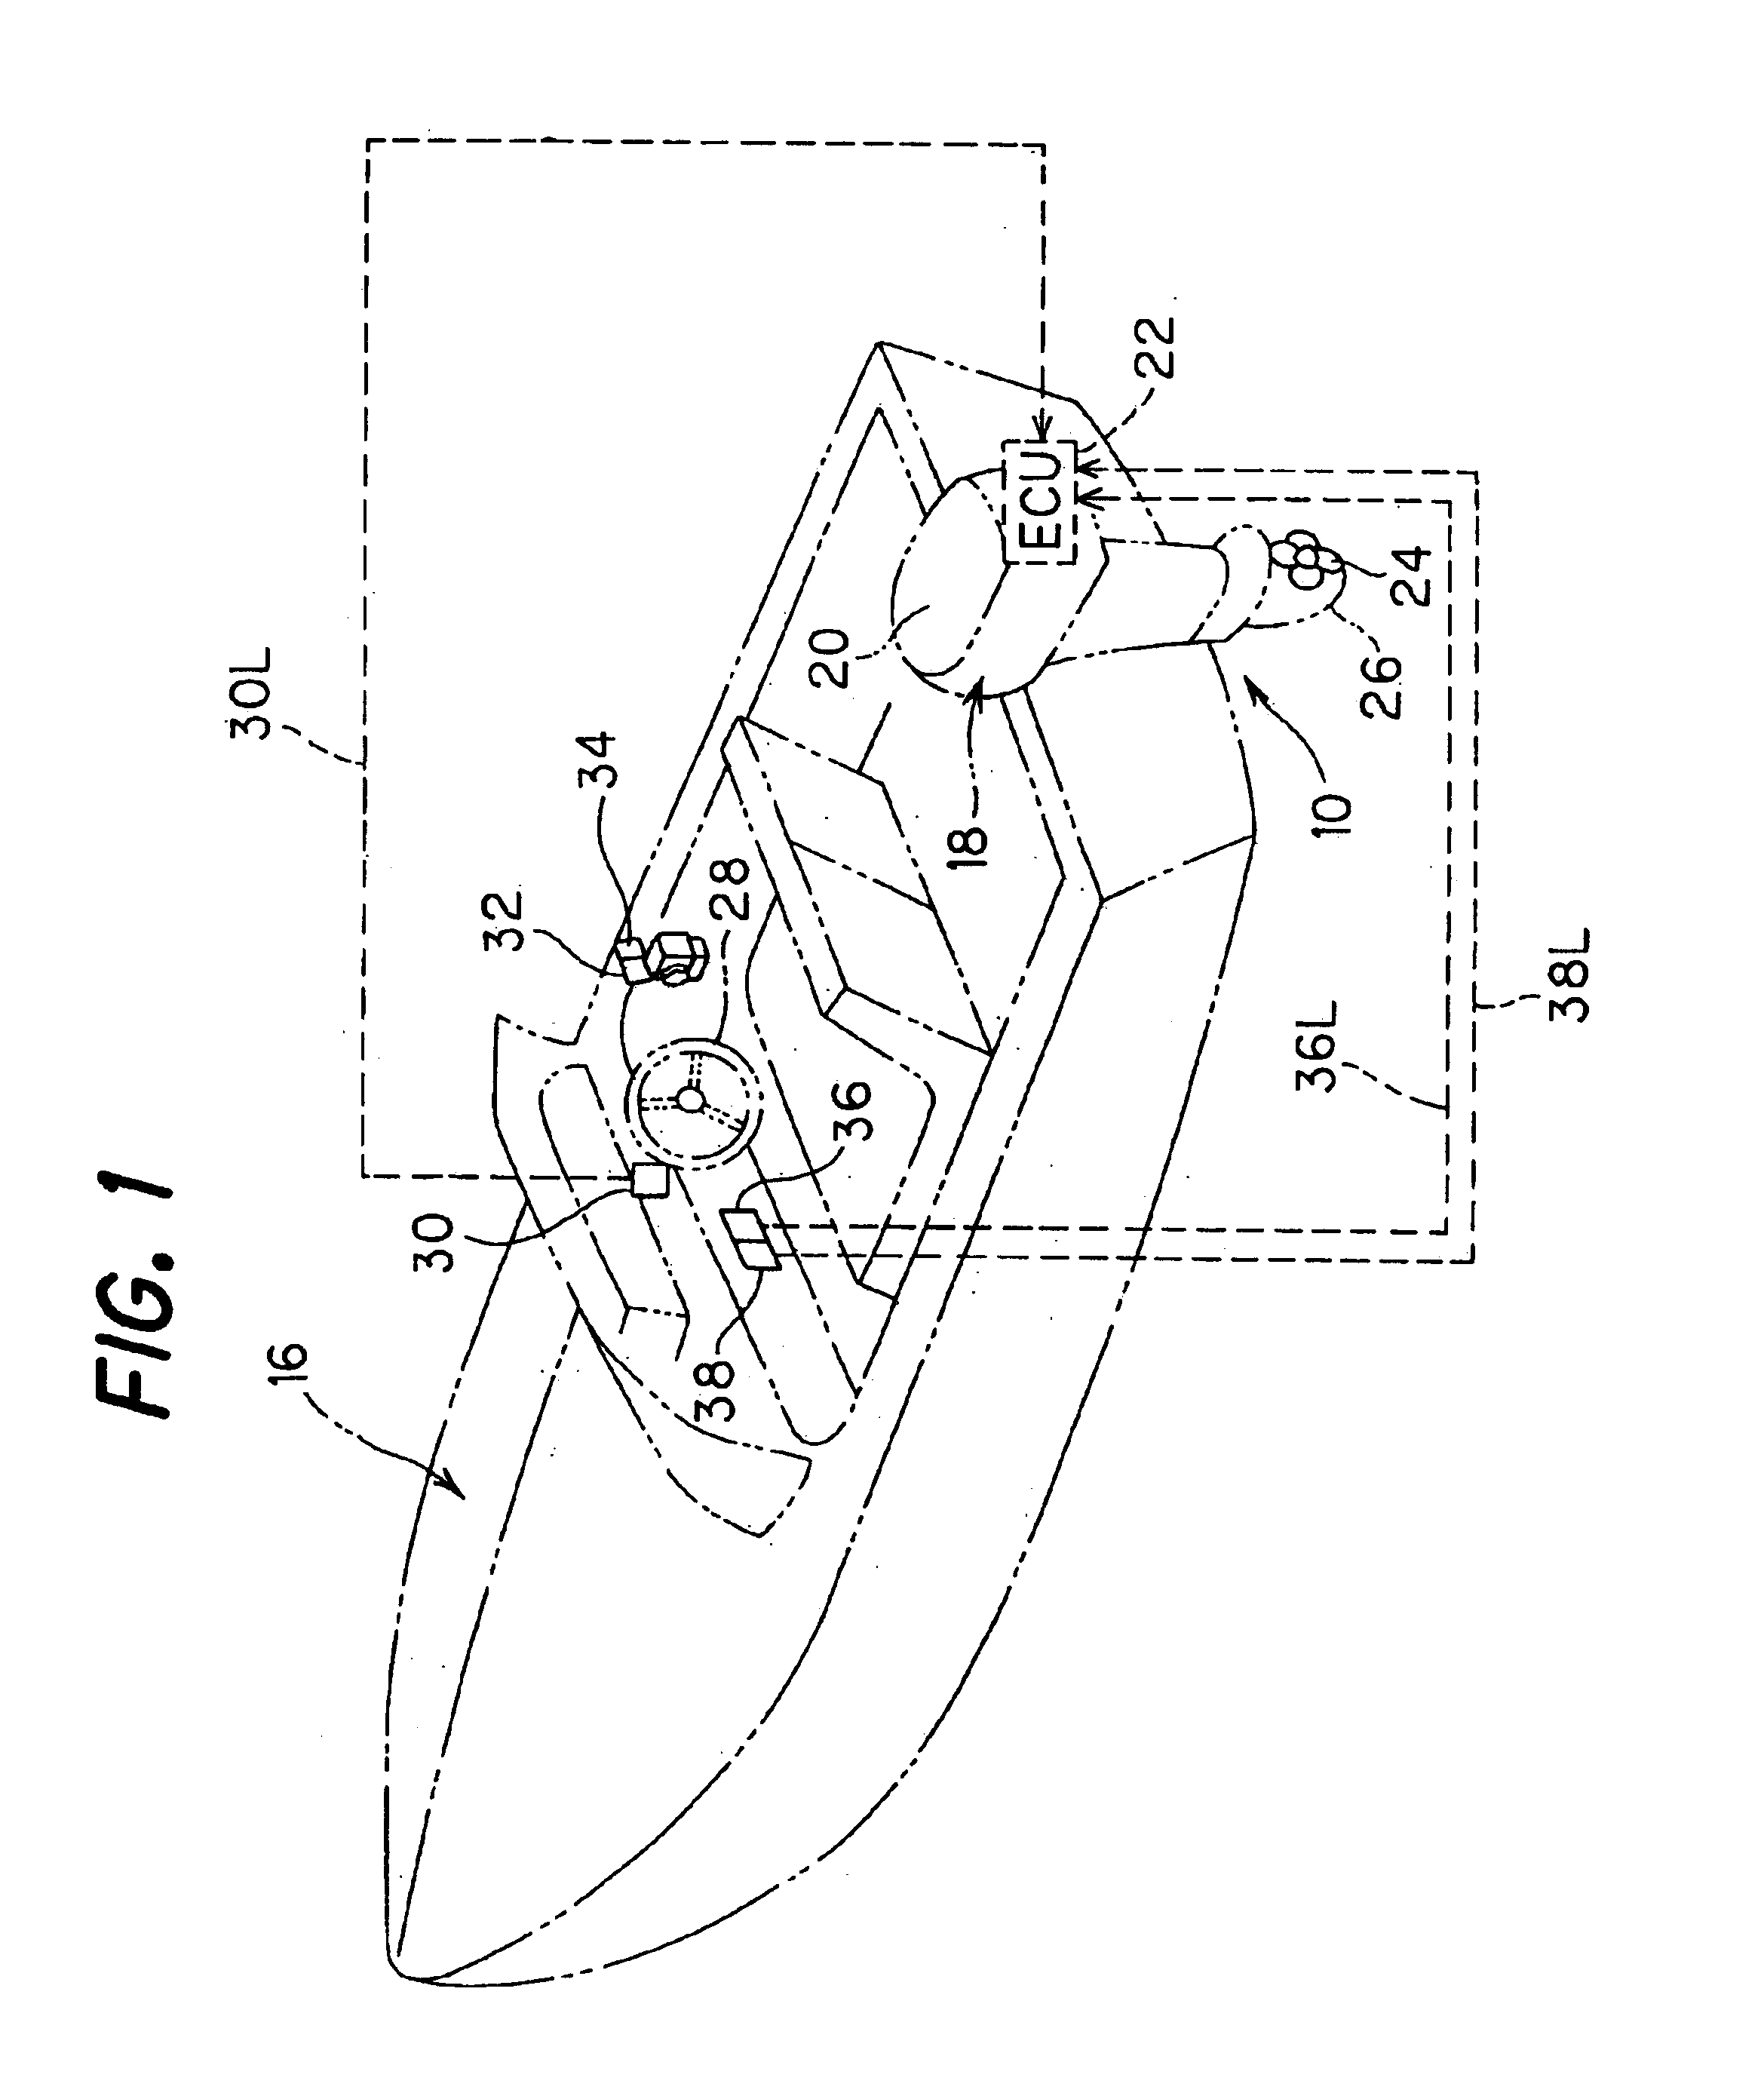 Outboard motor steering system